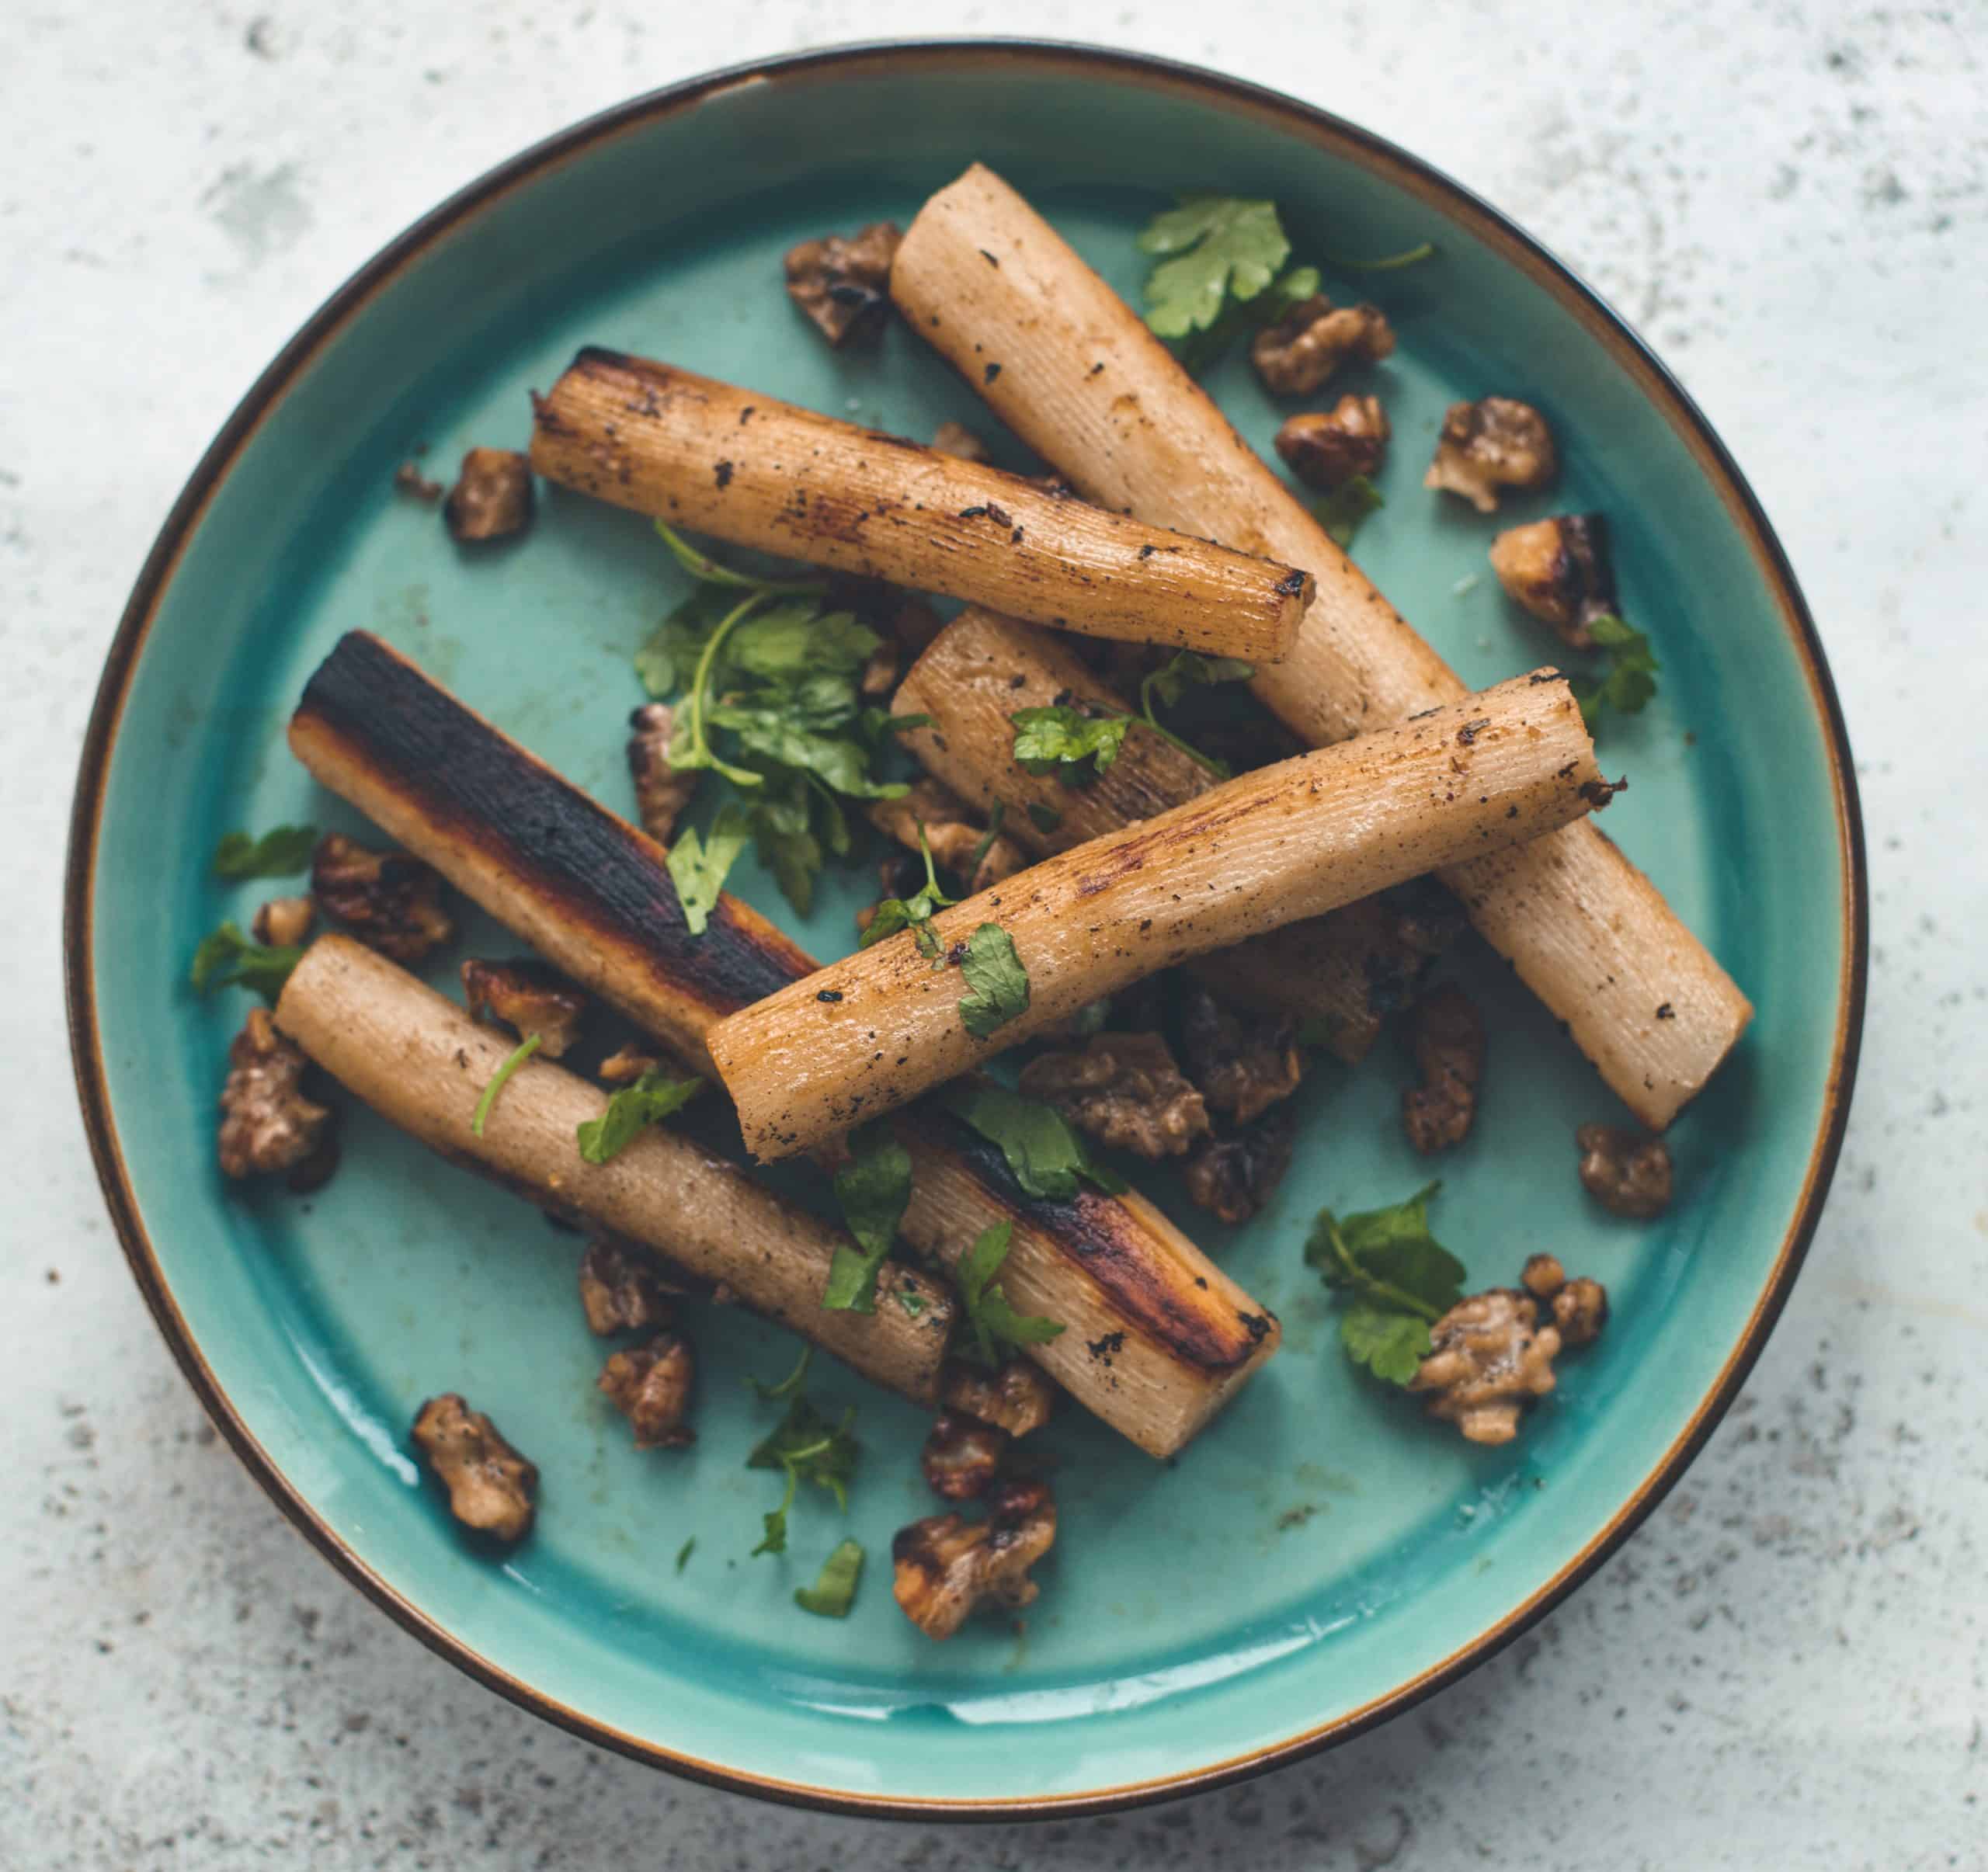 A plate of braised salsify